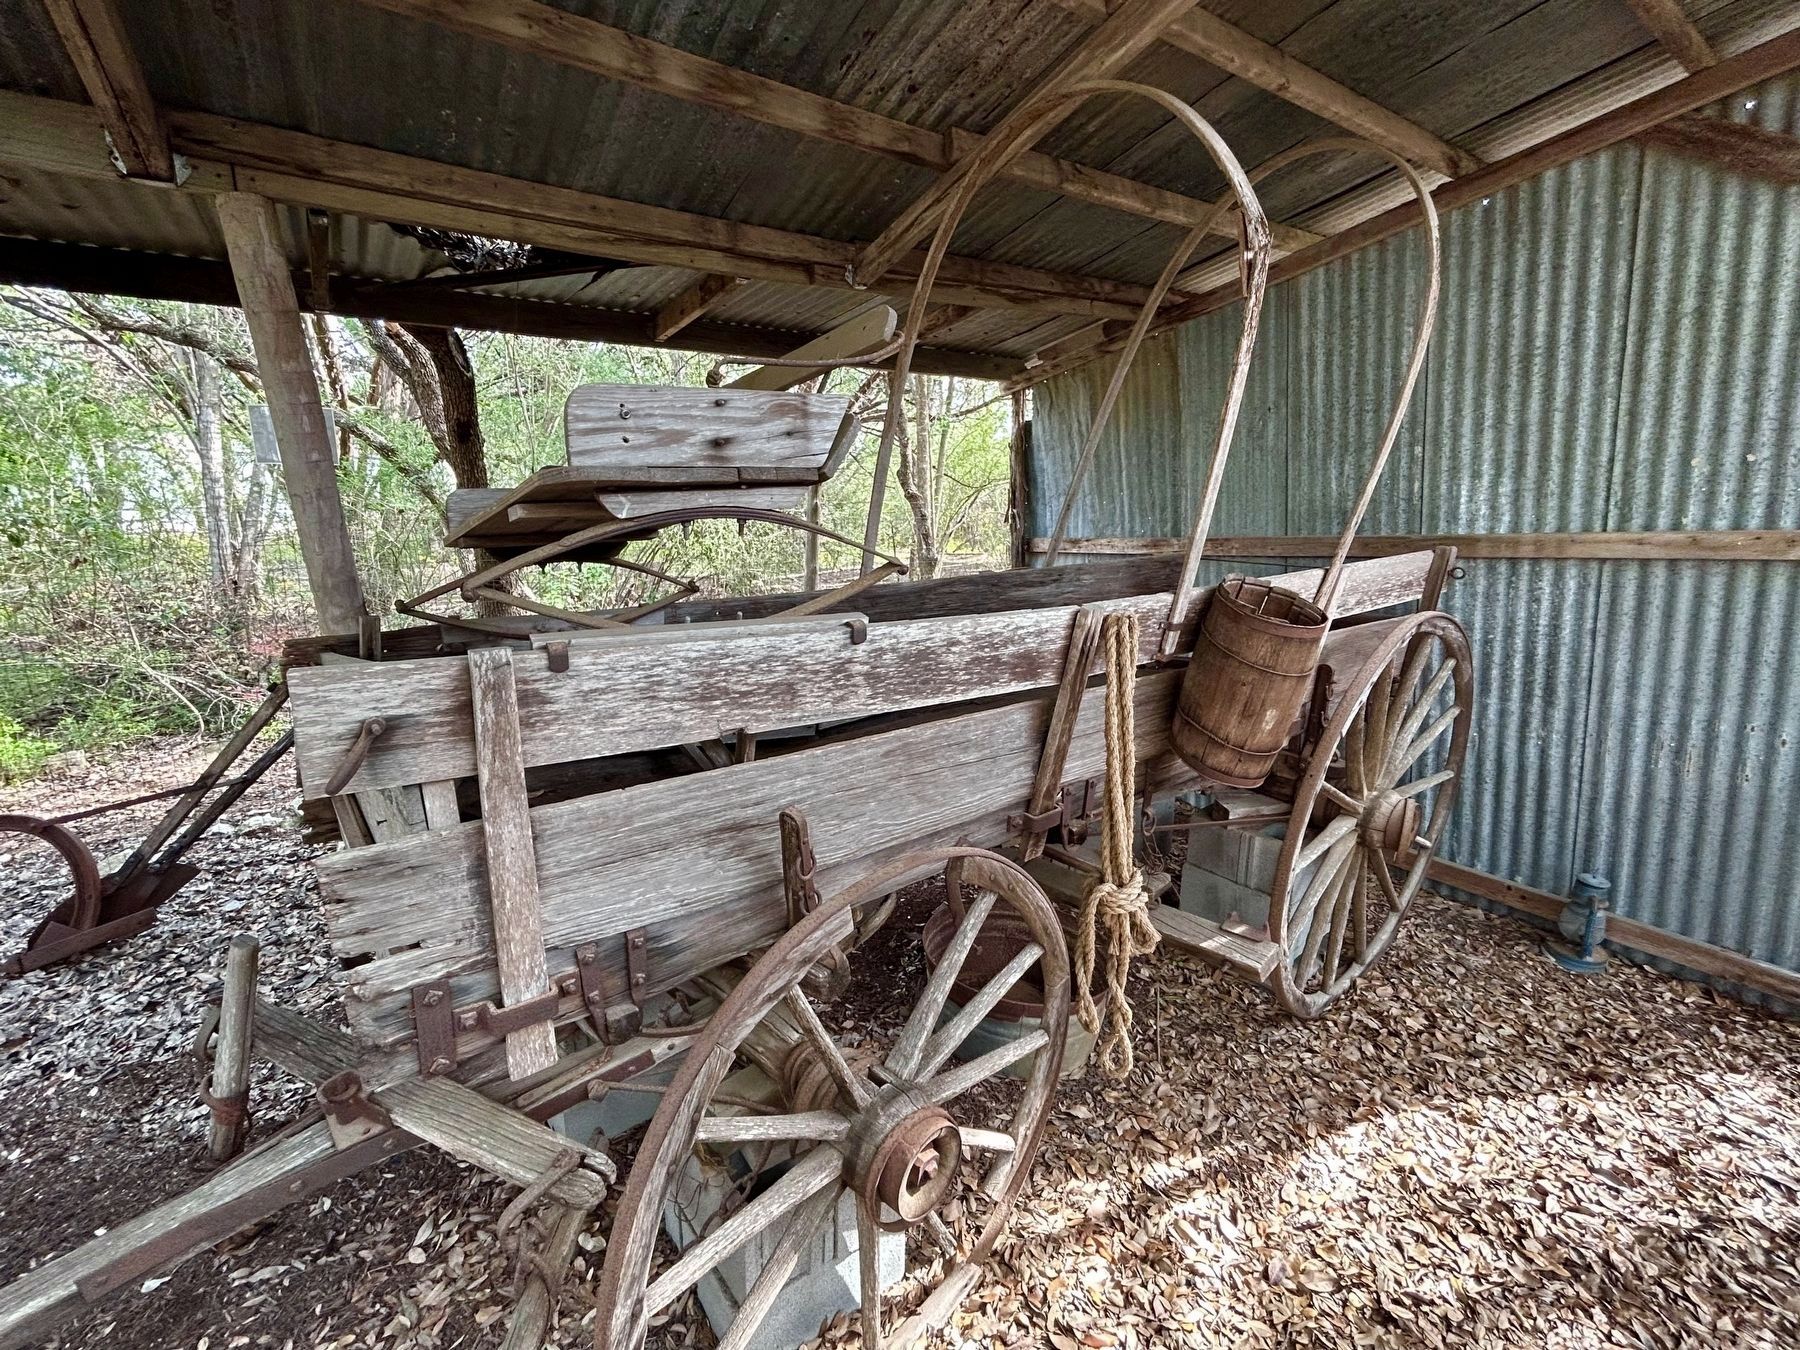 Covered wagon from the 1800s. image. Click for full size.